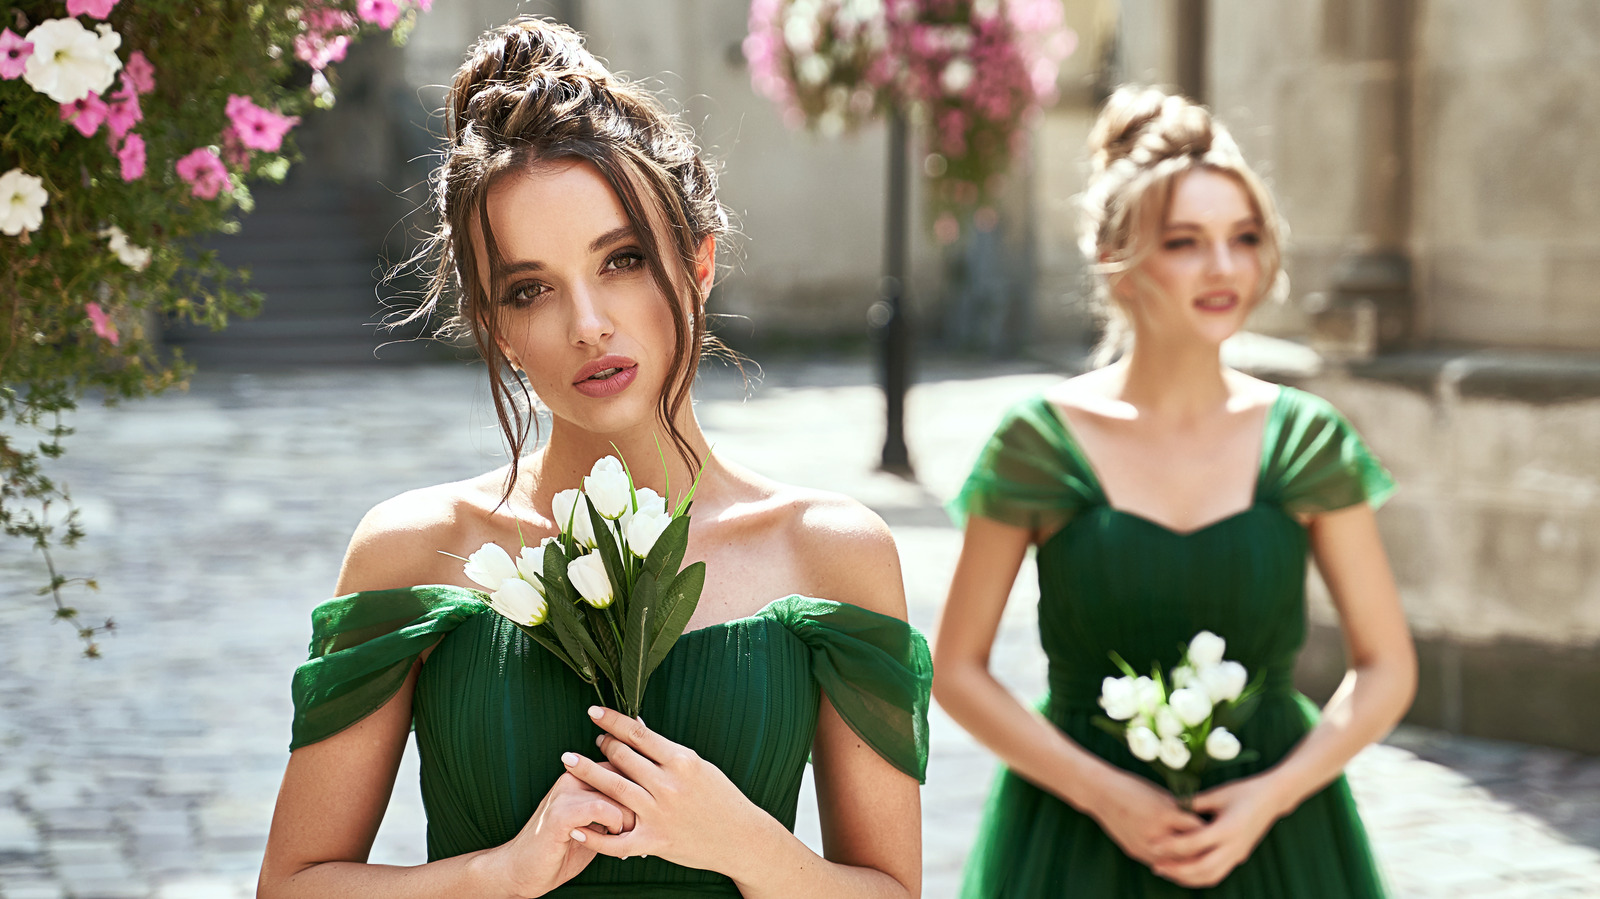 Can You Repurpose An Already-Worn Bridesmaid Dress For Another Wedding?